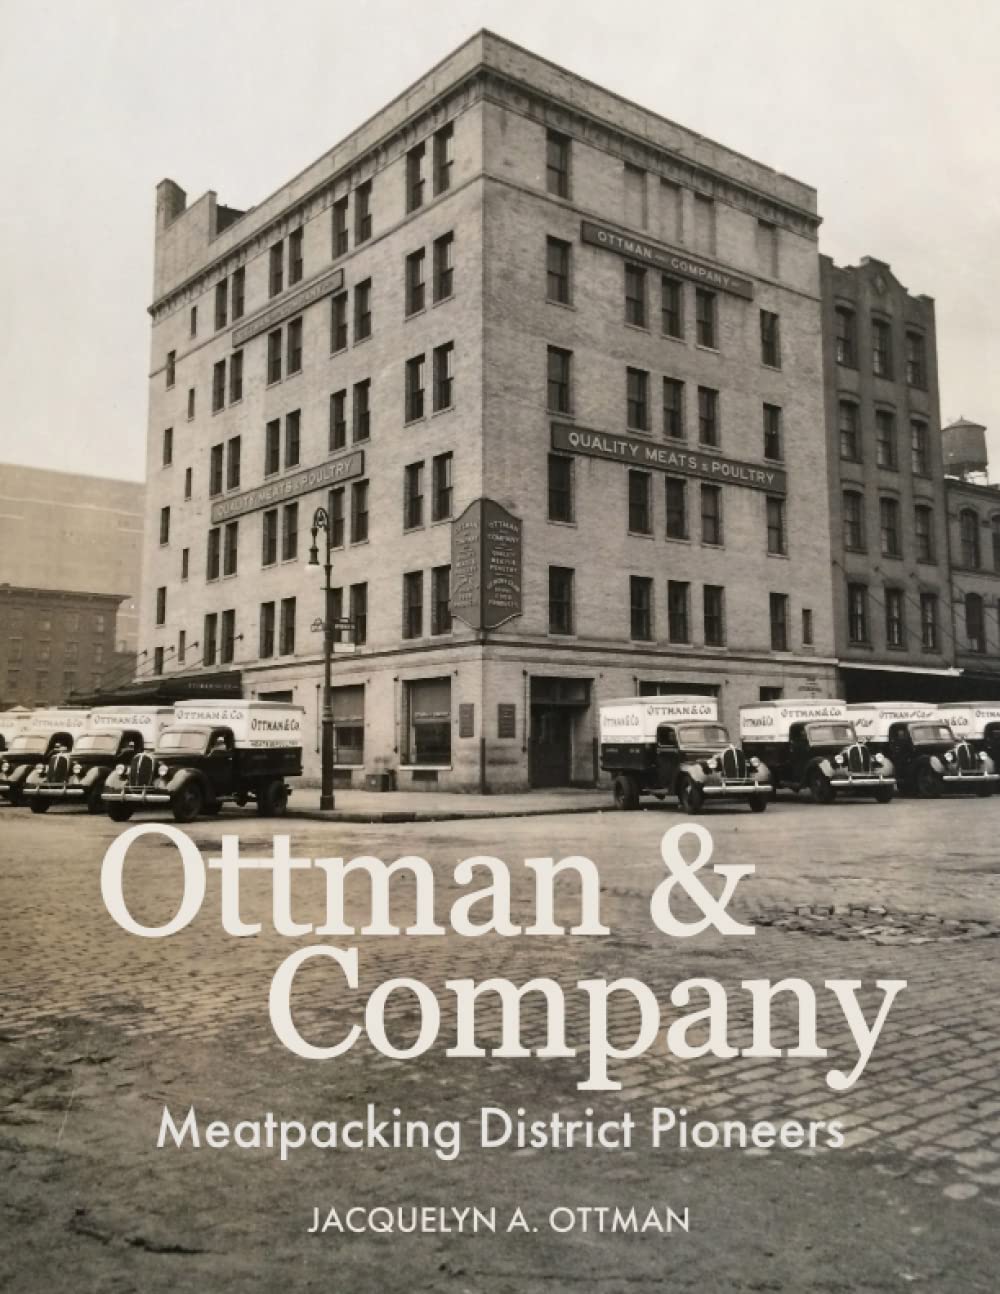 Ottman & Company: Meatpacking District Pioneers book by Jacquelyn Ottman